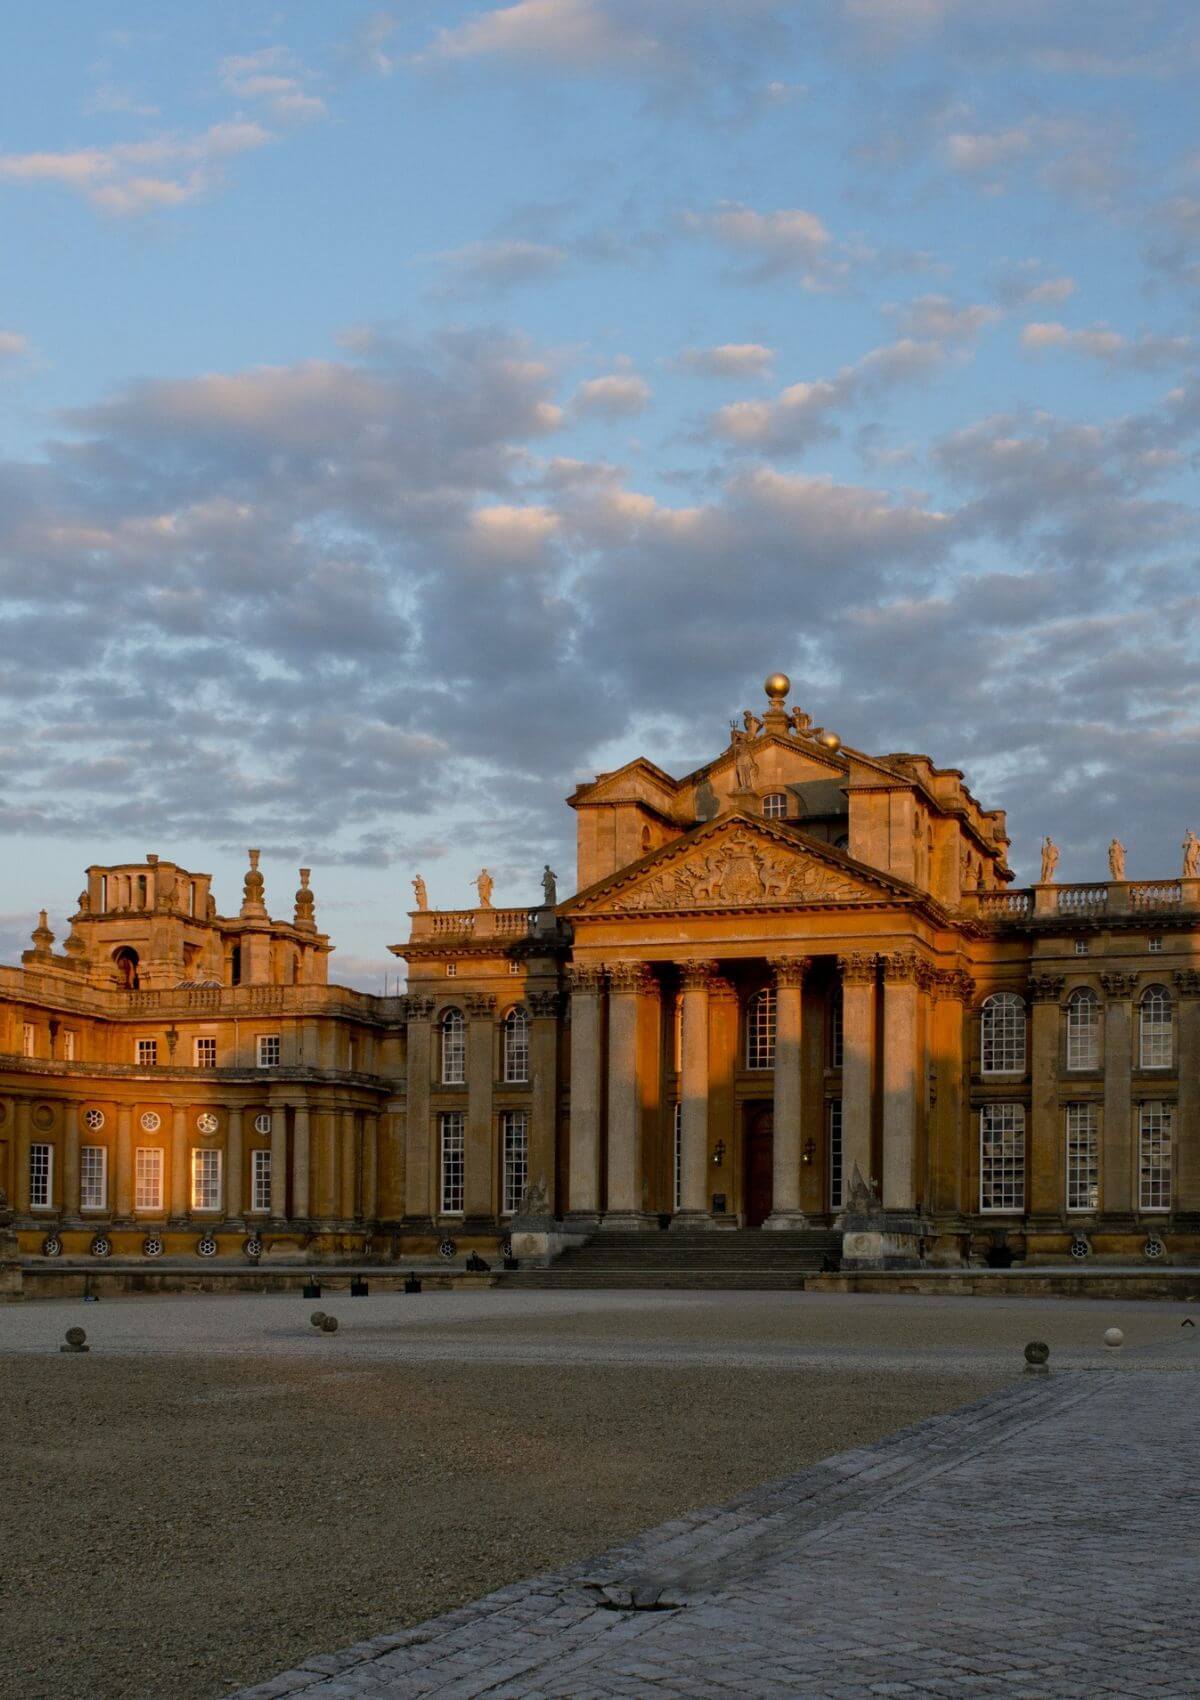 Easter days out at Blenheim Palace